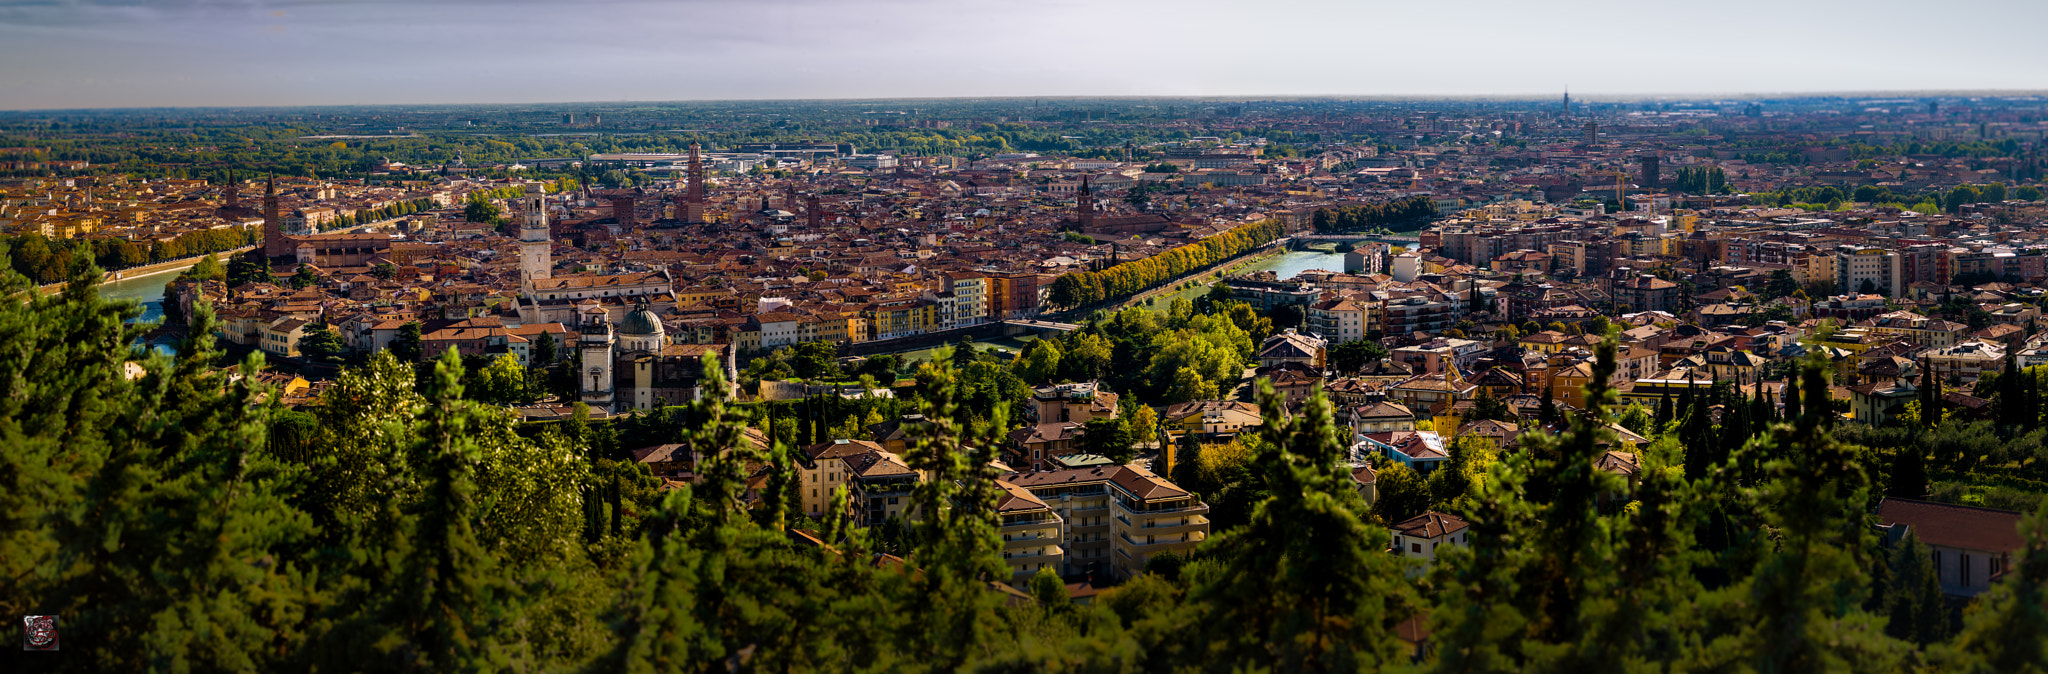 Leica M9 + Leica APO-Summicron-M 90mm F2 ASPH sample photo. North italy: verona on the river adige - get an overview photography